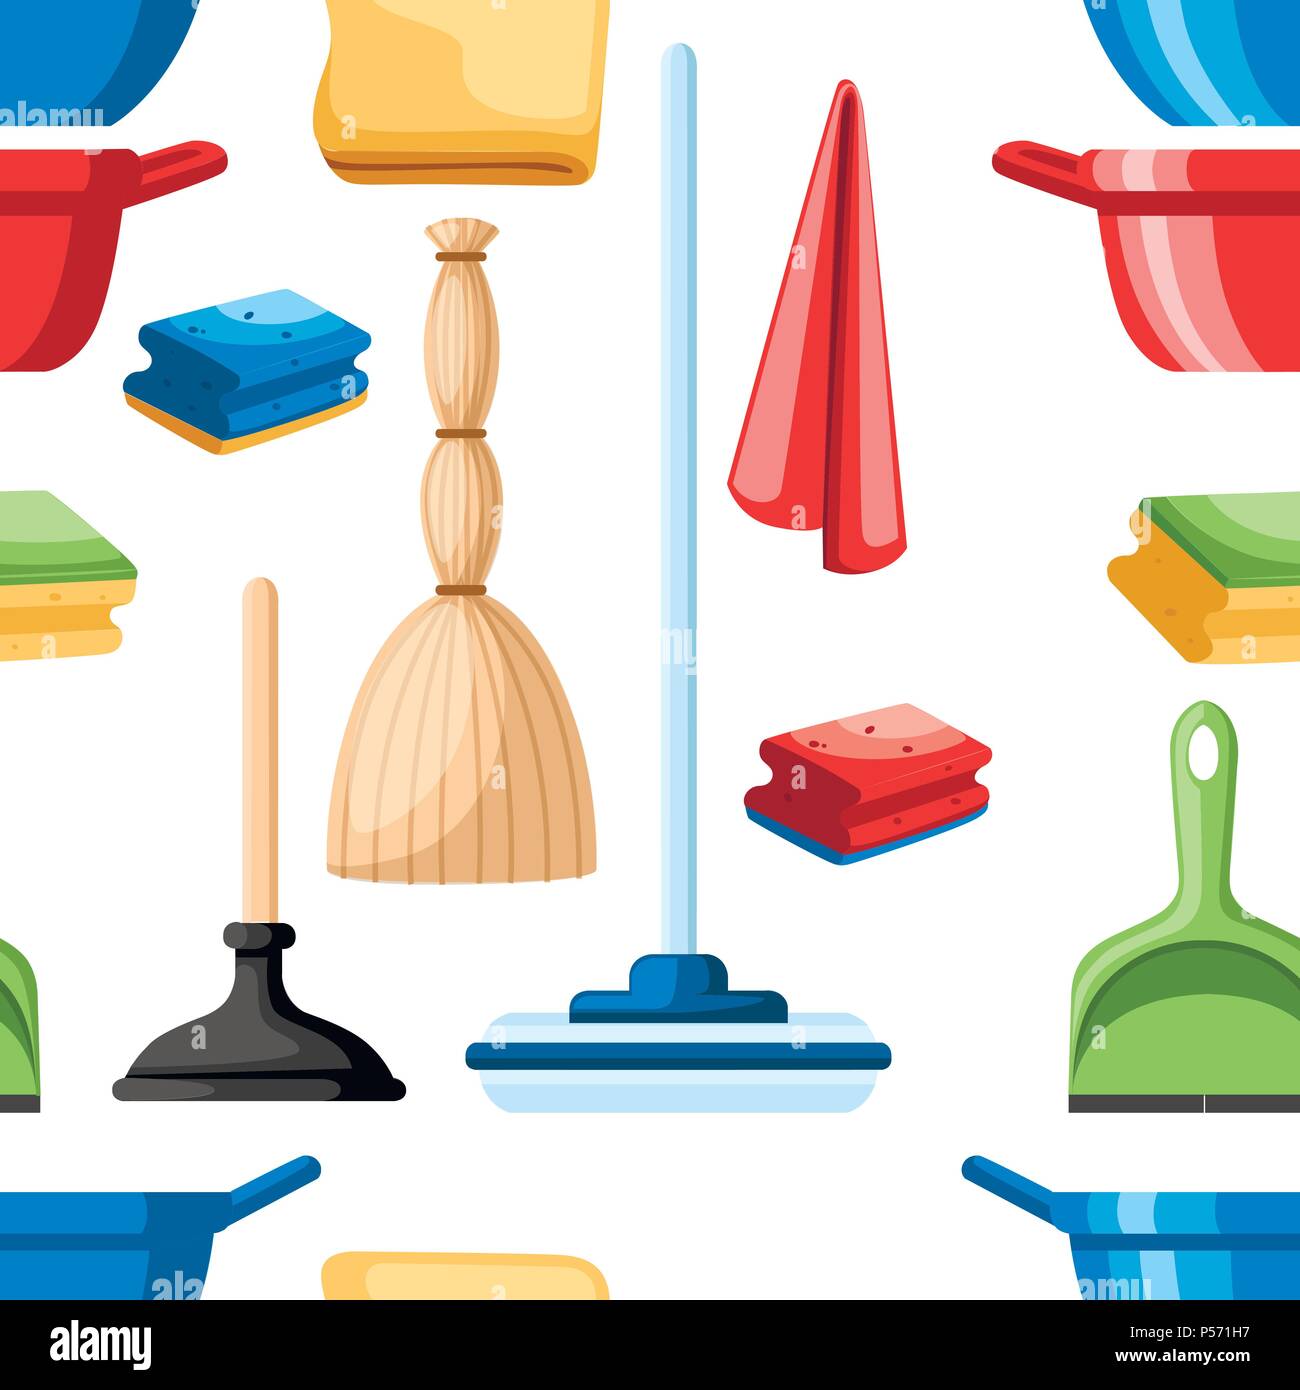 Seamless pattern. Cleaning set objects. Plastic dustpan and bowl. Mop, plunger and rags. Flat design style. Vector illustration on white background. Stock Vector